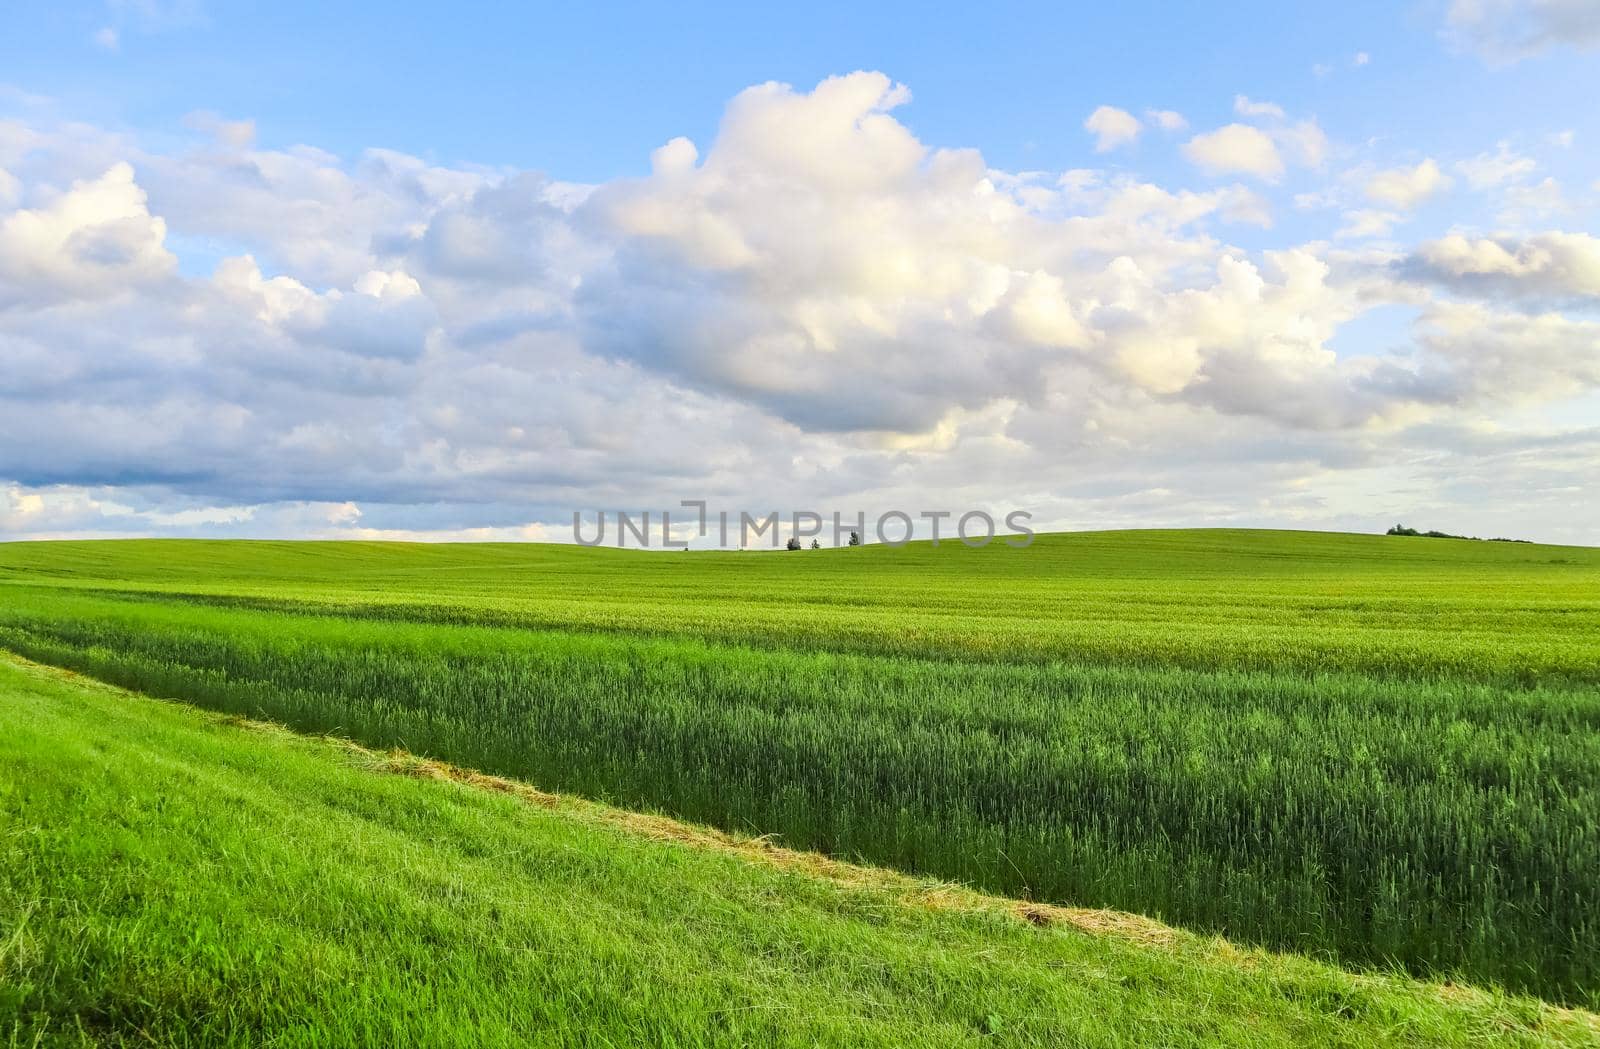 Wonderful green field, hills, trees and blue sky with clouds in the countryside. Spring landscape